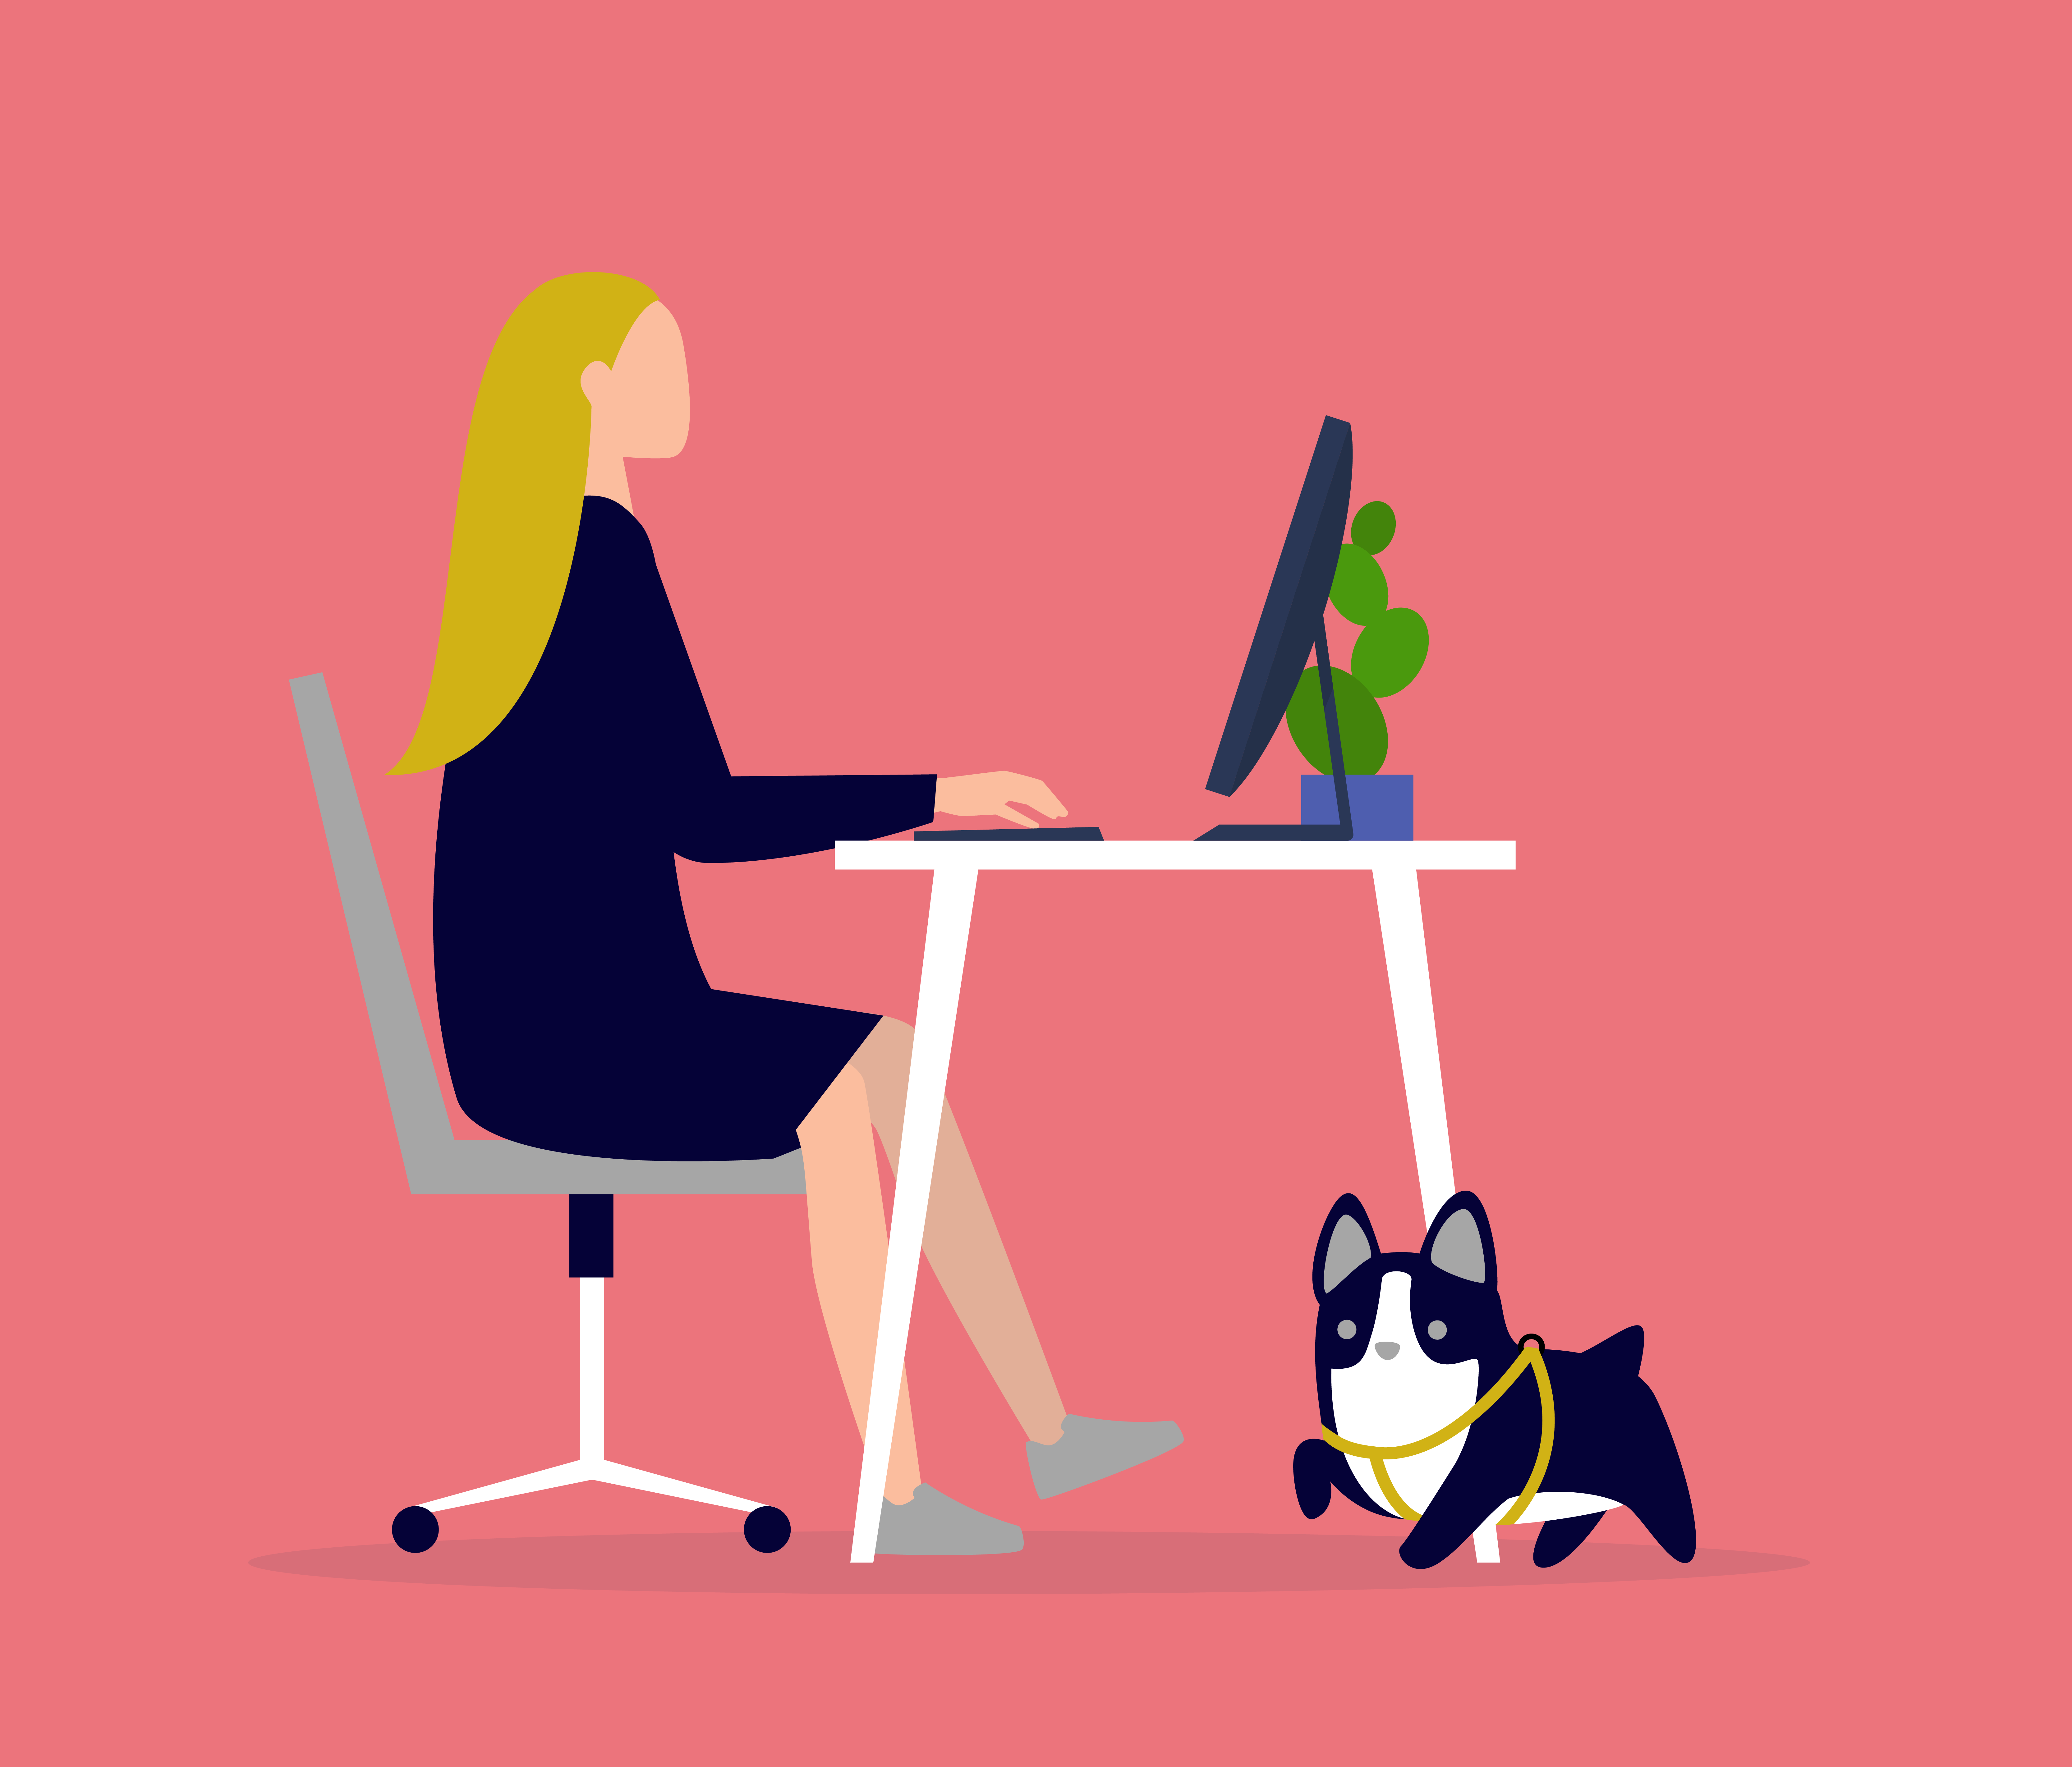 Show how dogs can be part of our work environment.